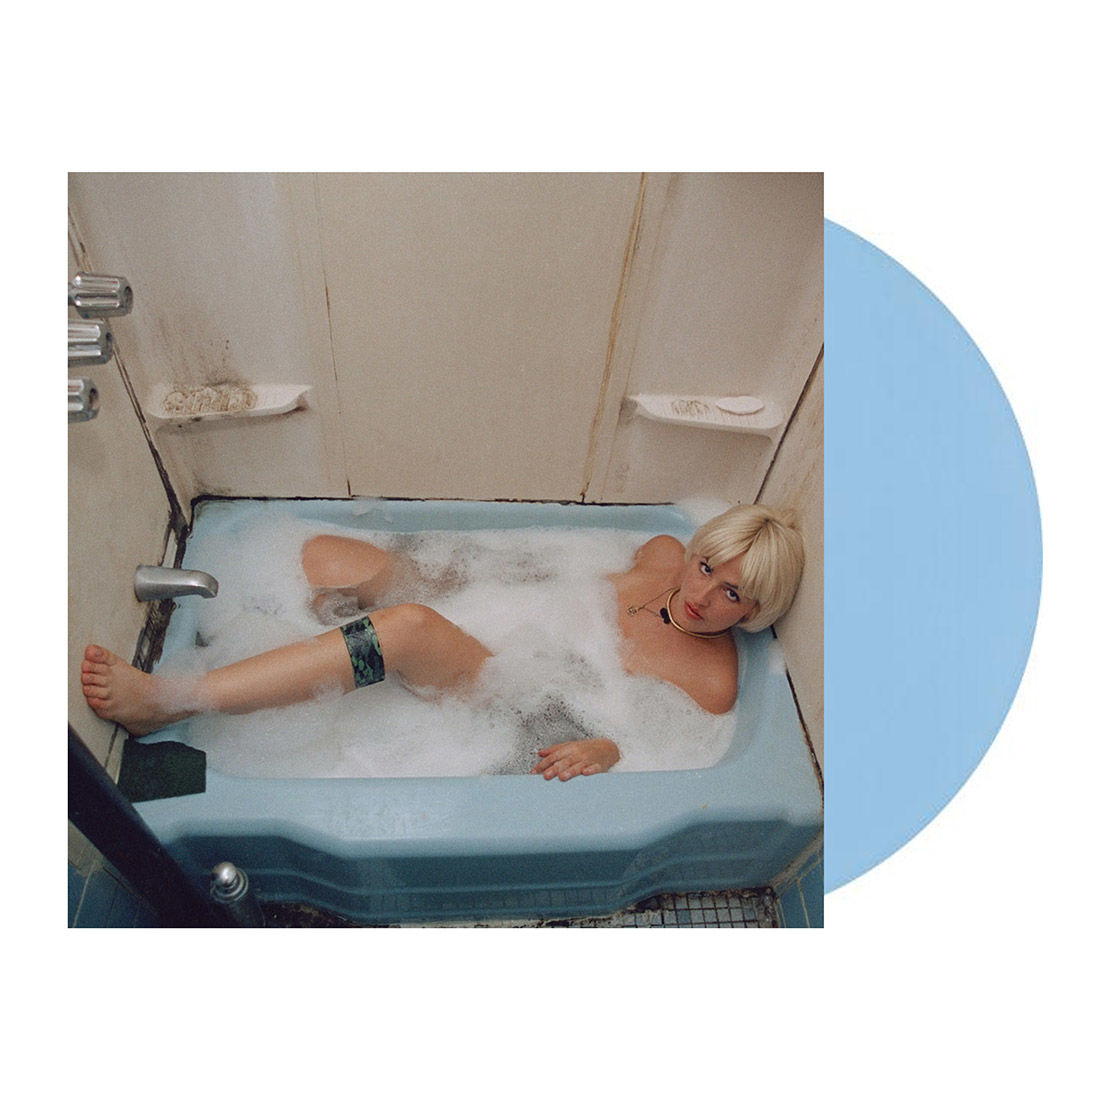 Live At The BBC: Limited Edition Sky Blue Vinyl LP